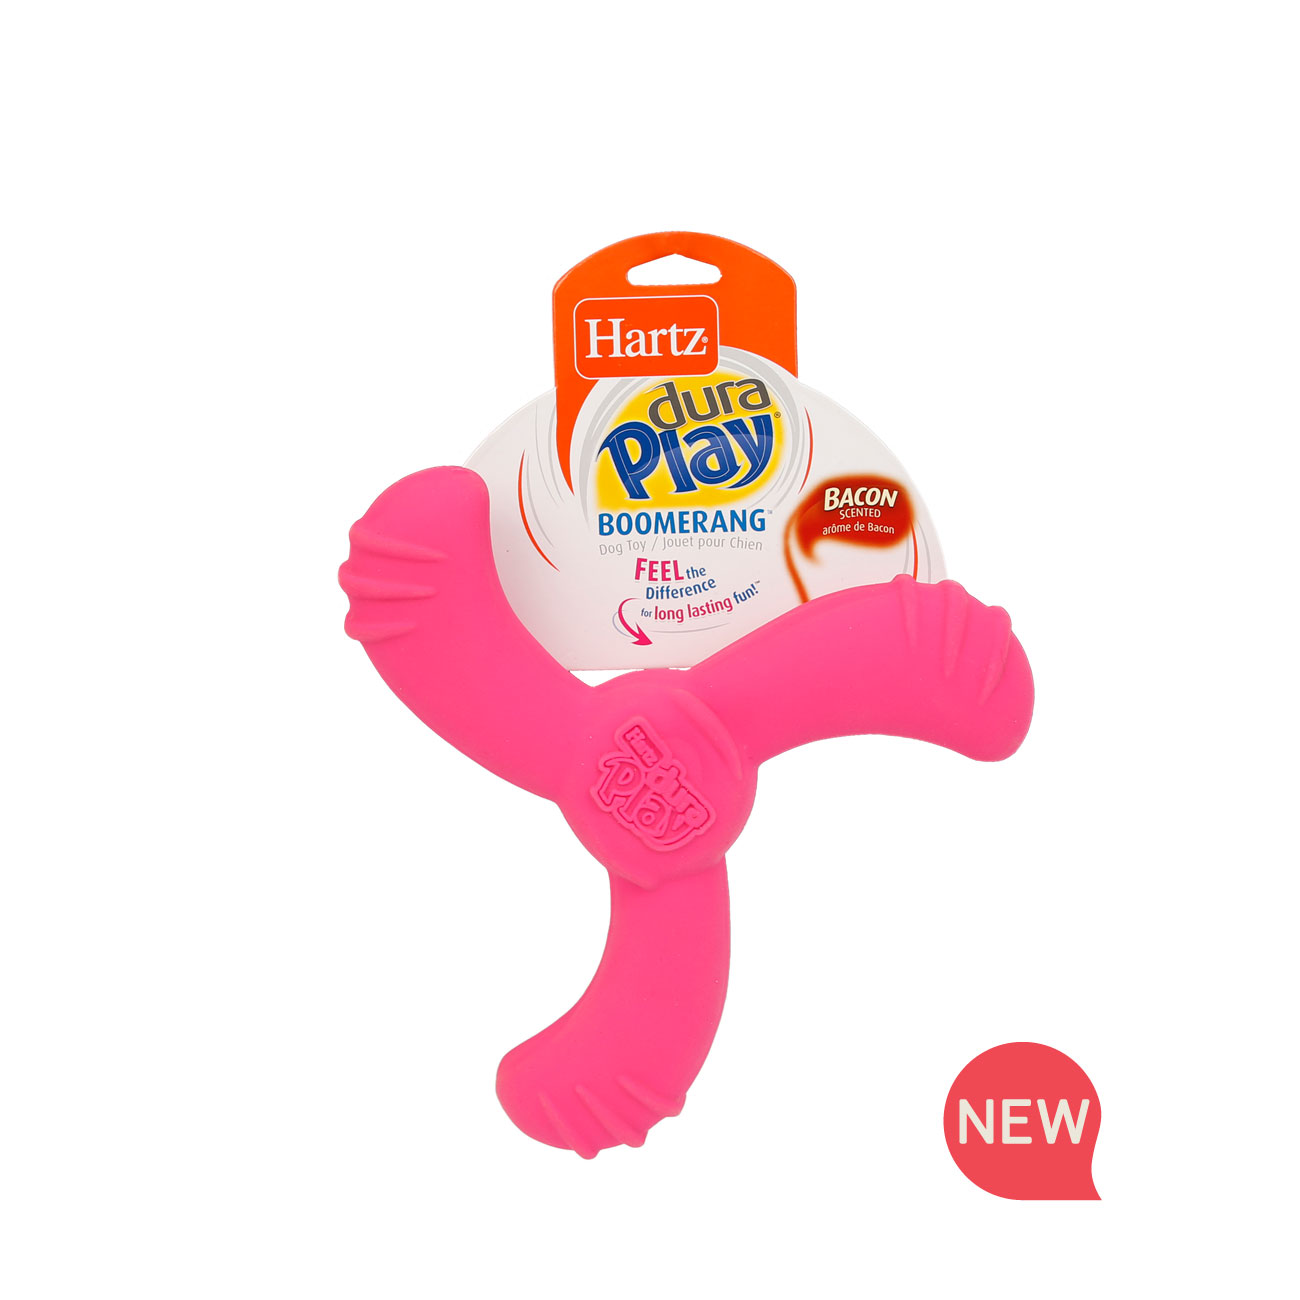 Hartz SKU#3270011227. Hartz Dura Play Boomerang dog toy. Pink squeaky dog toy. One of many Hartz toys for dogs.